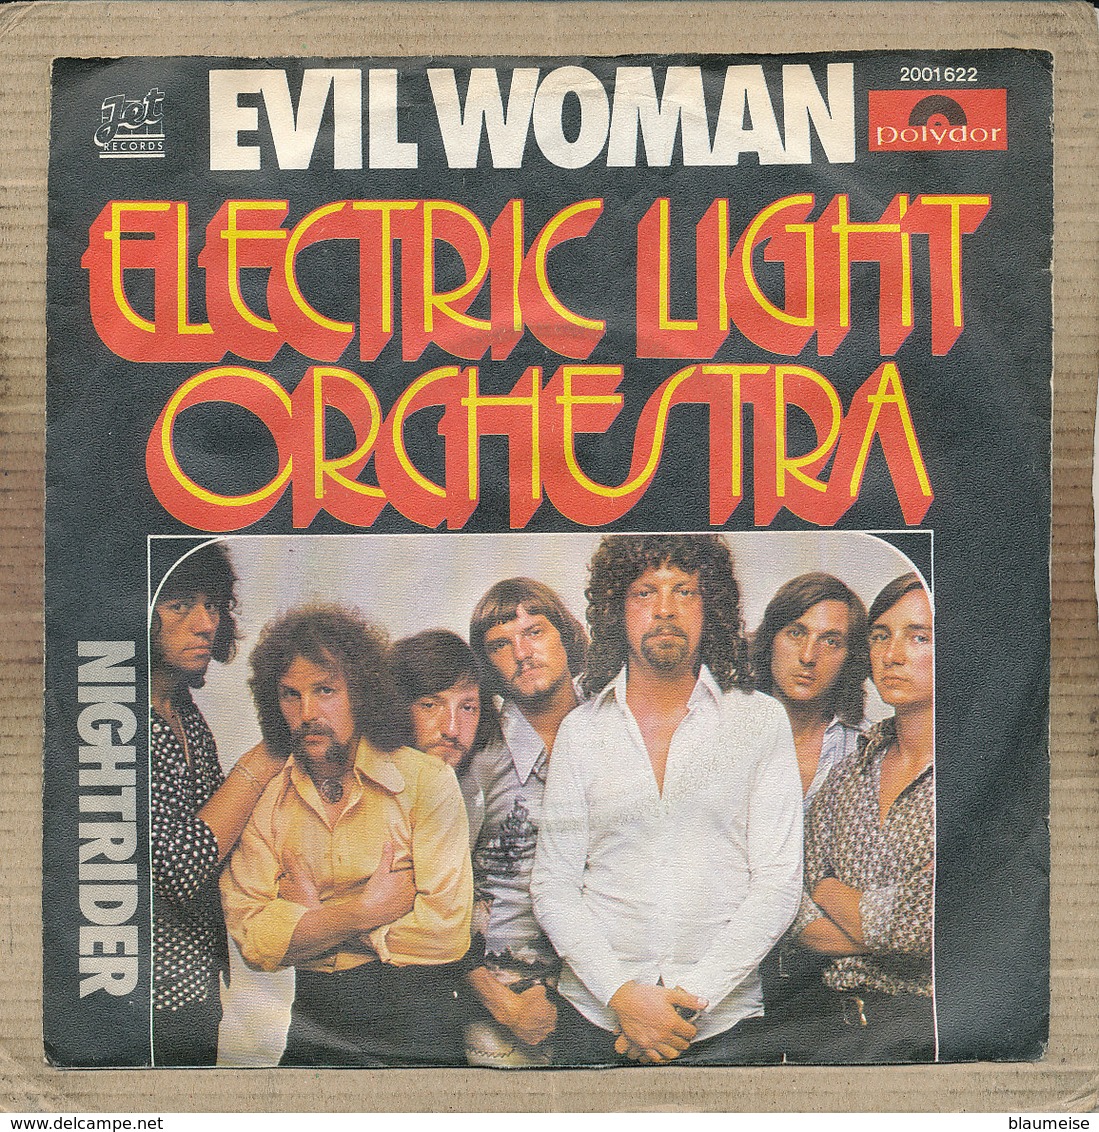 7" Single, The Electric Light Orchestra, Evil Woman - Disco, Pop